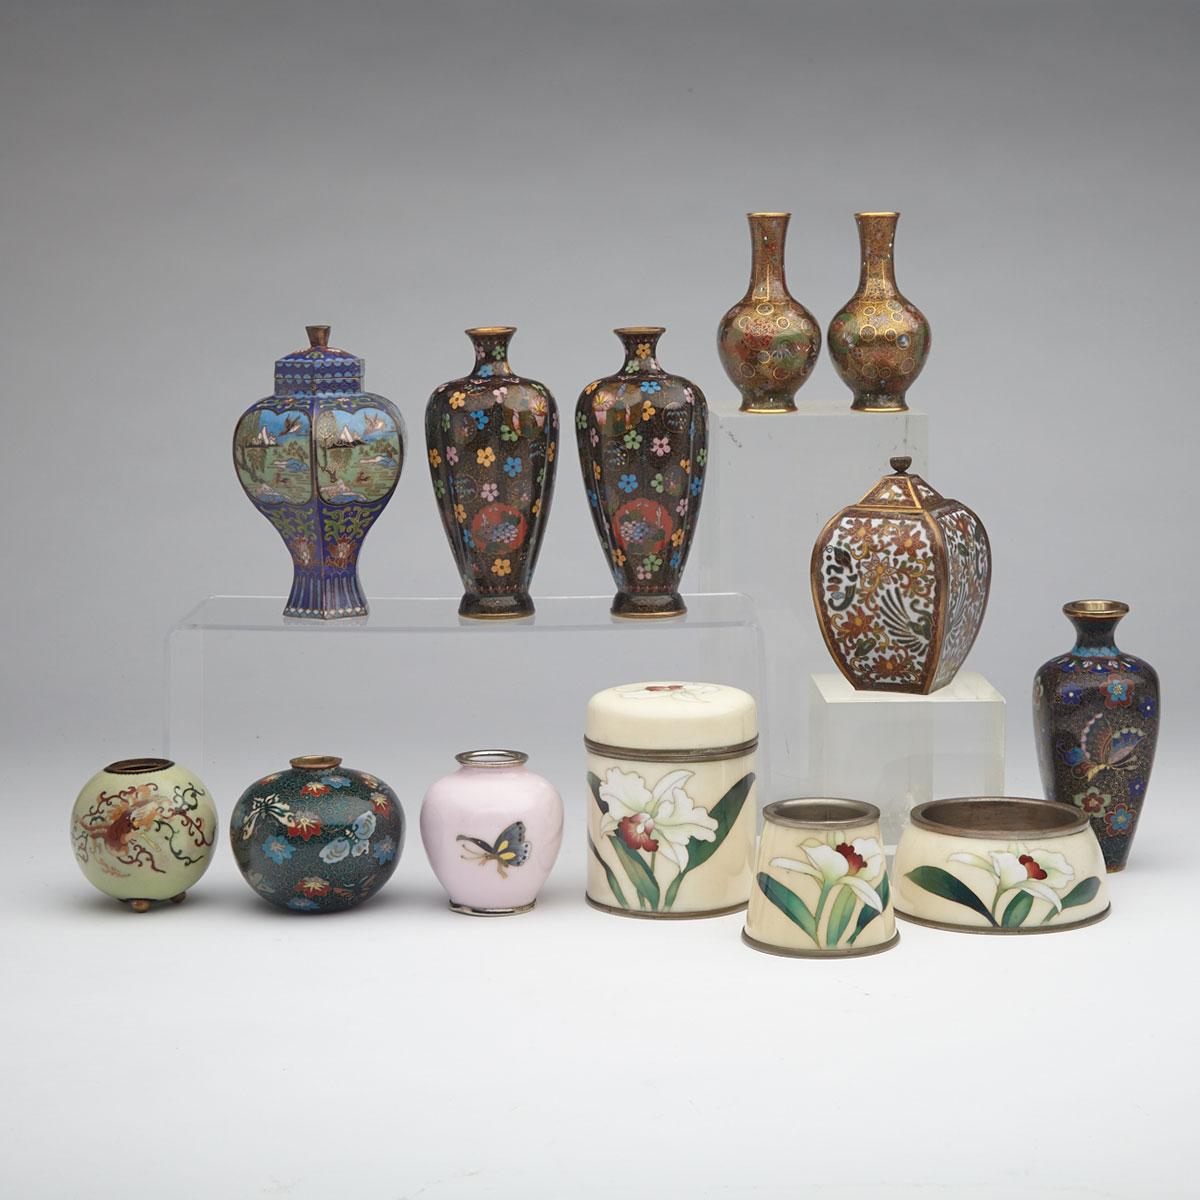 Group of Thirteen Small Cloisonné Enamel Vessels, Japan, First-Half 20th Century